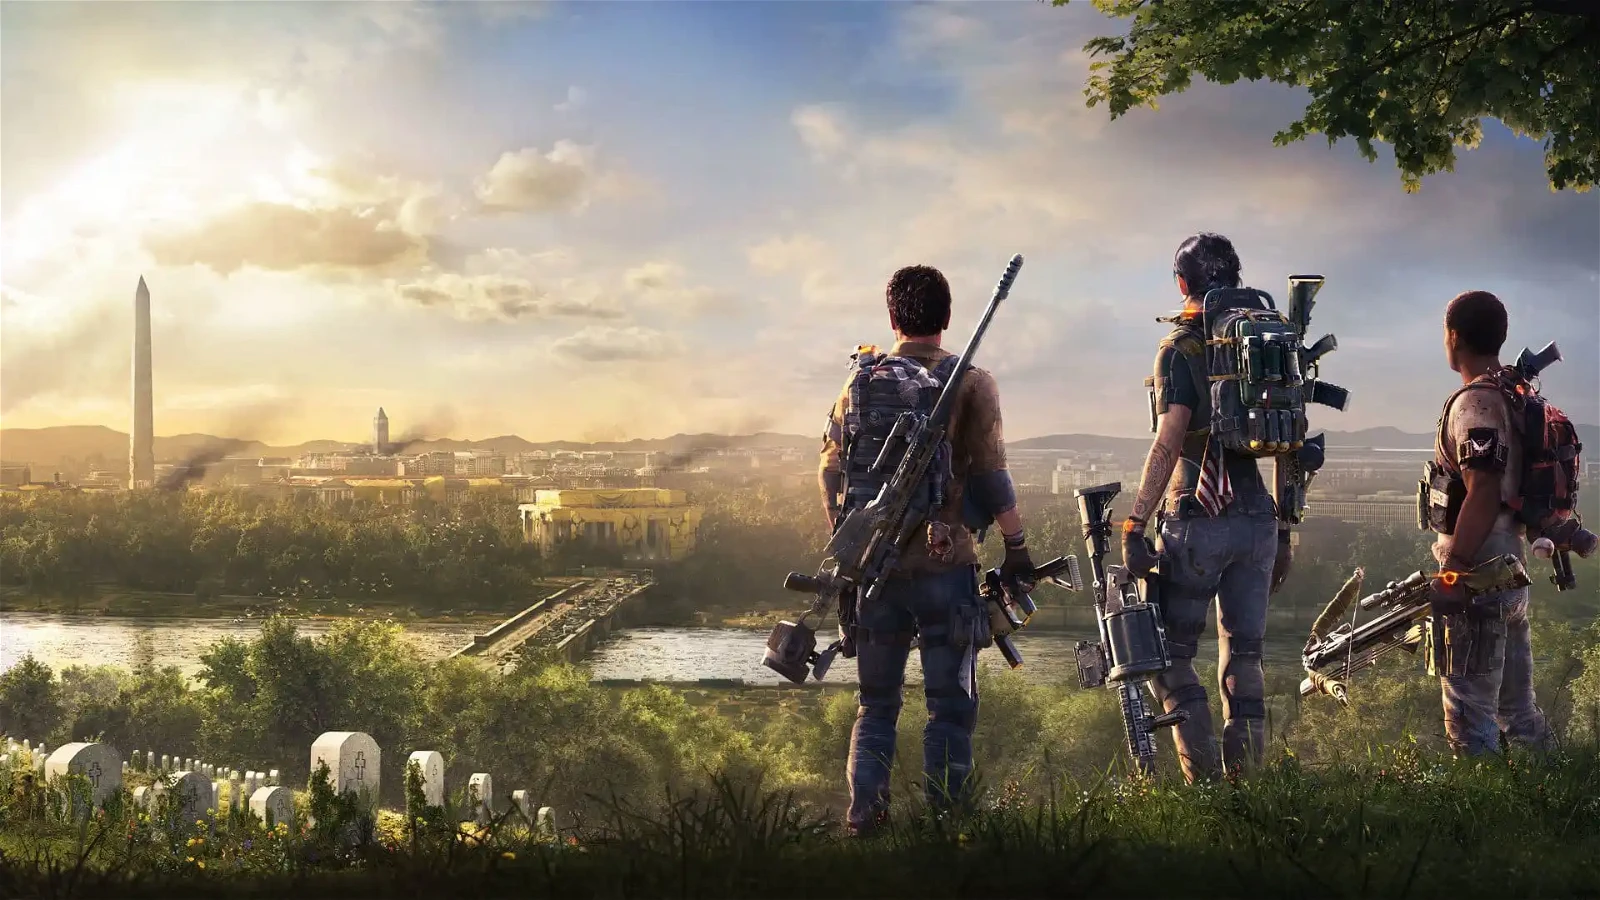 Ubisoft announces The Division 3, a new entry in the popular third-person tactical shooter looter shooter series, set in a new location with a new story and new characters.